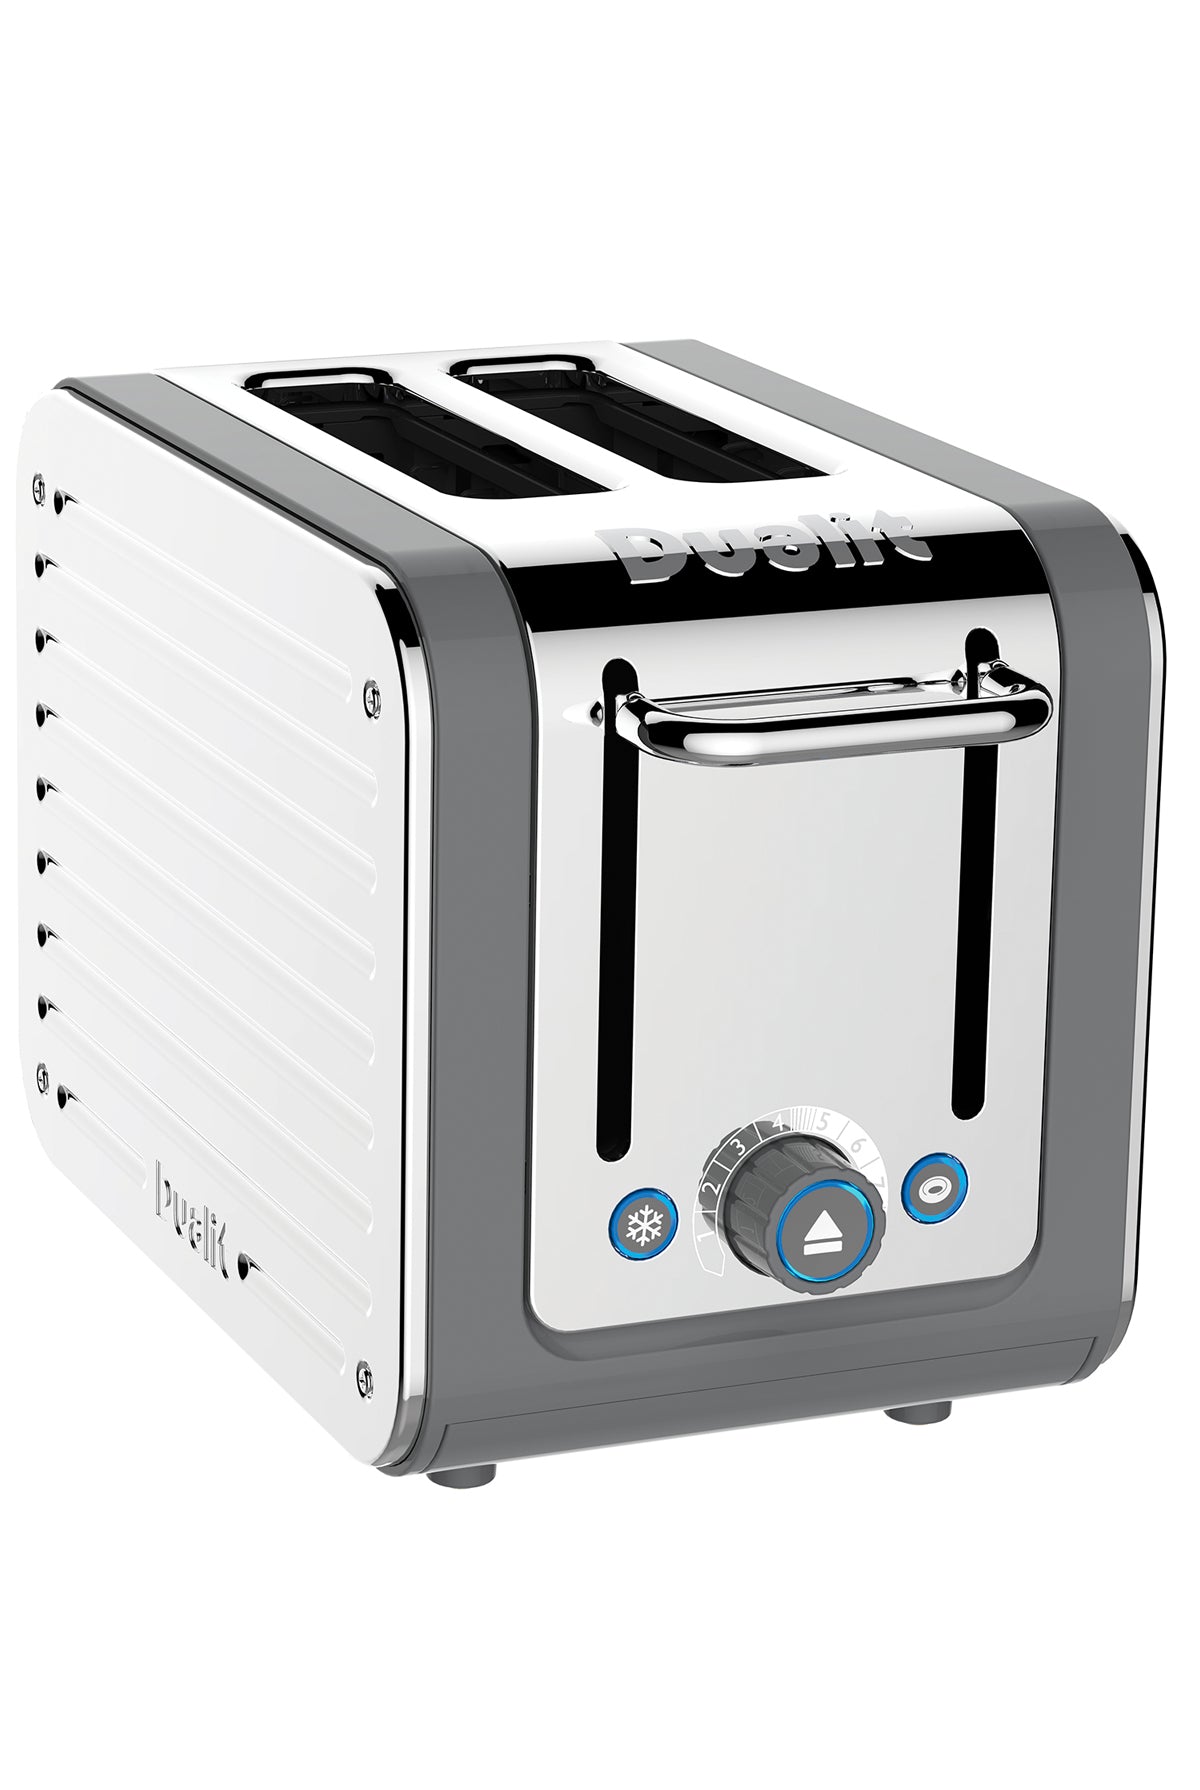 Dualit Architect 2 Slot Grey & Stainless Steel Toaster